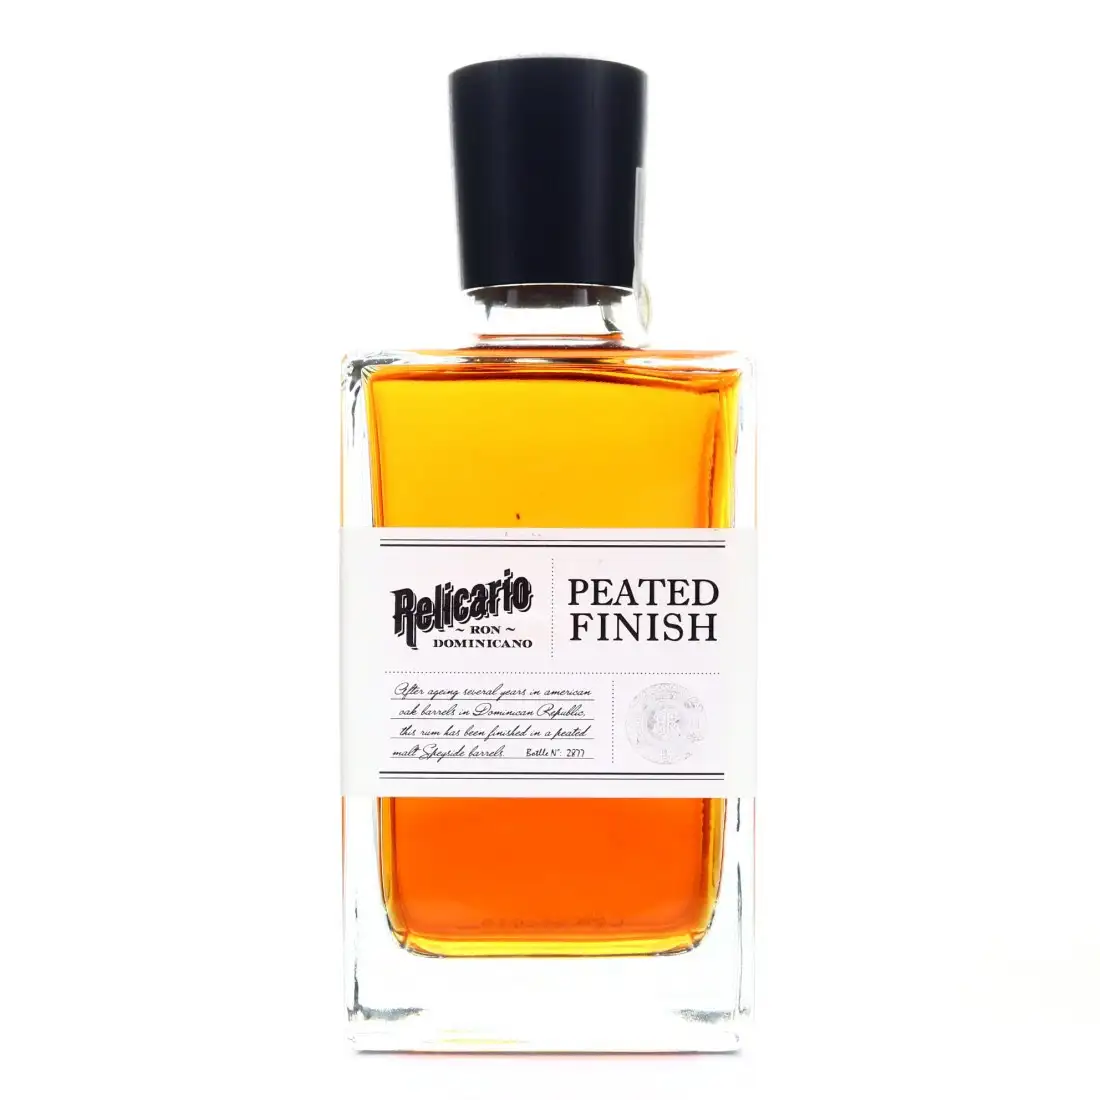 Image of the front of the bottle of the rum Relicario Peated Finish